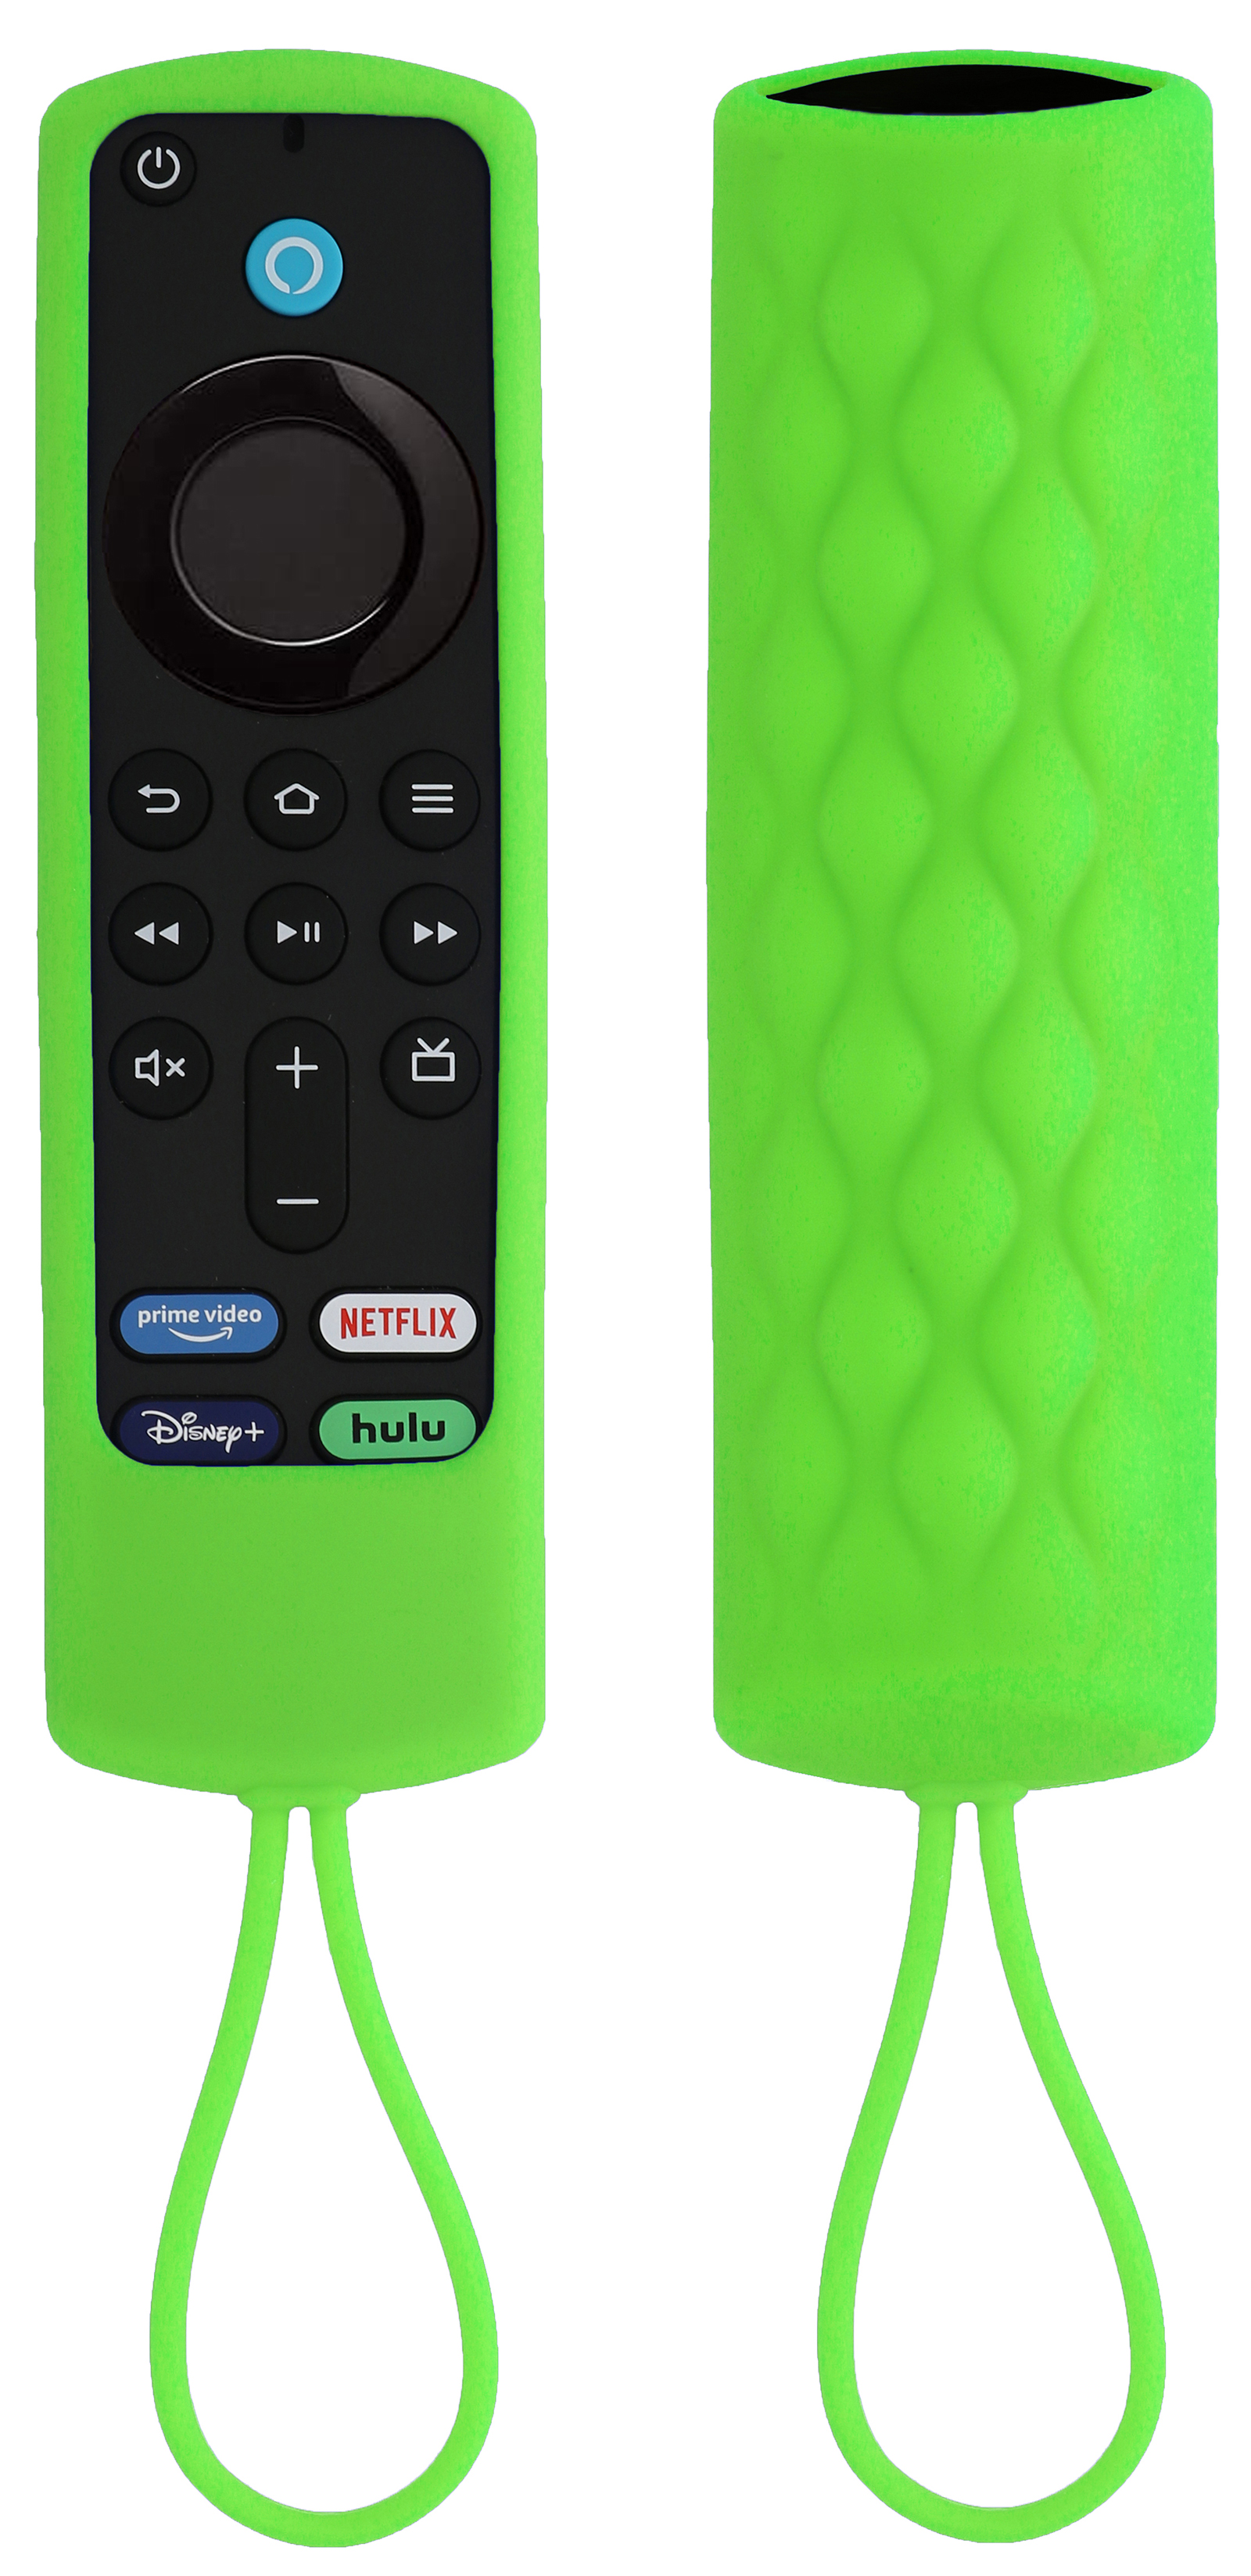 TOKERSE Remote Case for Alexa Voice Remote 3rd and 2nd Generation 2018-2021 release - Silicone case with Wrist Strap for Fire TV Stick 2021 (3rd generation) / 2020 LITE / 4K / 2nd Generation remote control - Green